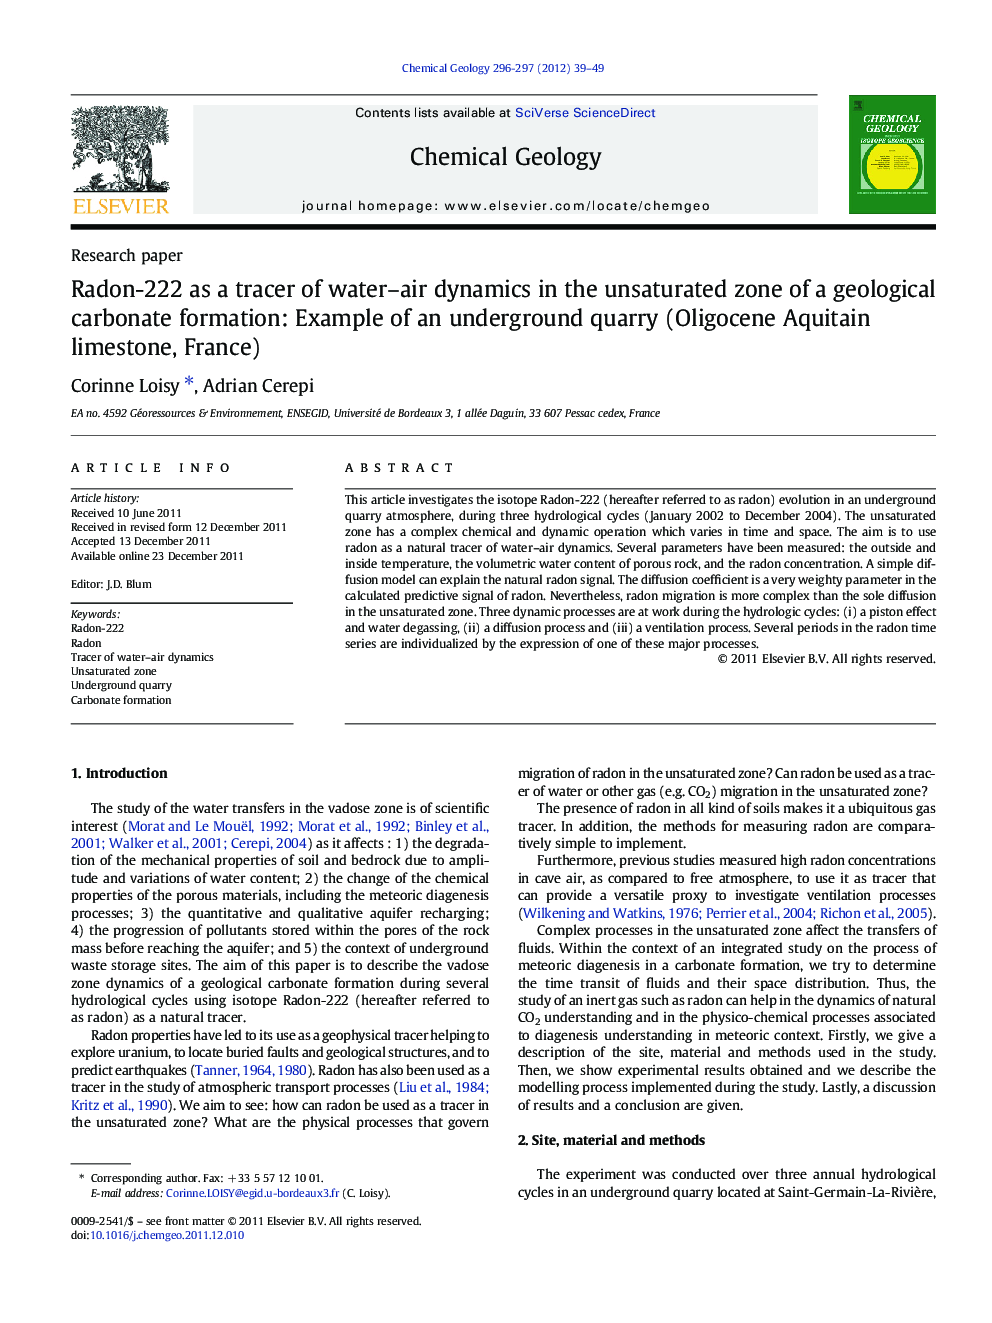 Radon-222 as a tracer of water–air dynamics in the unsaturated zone of a geological carbonate formation: Example of an underground quarry (Oligocene Aquitain limestone, France)